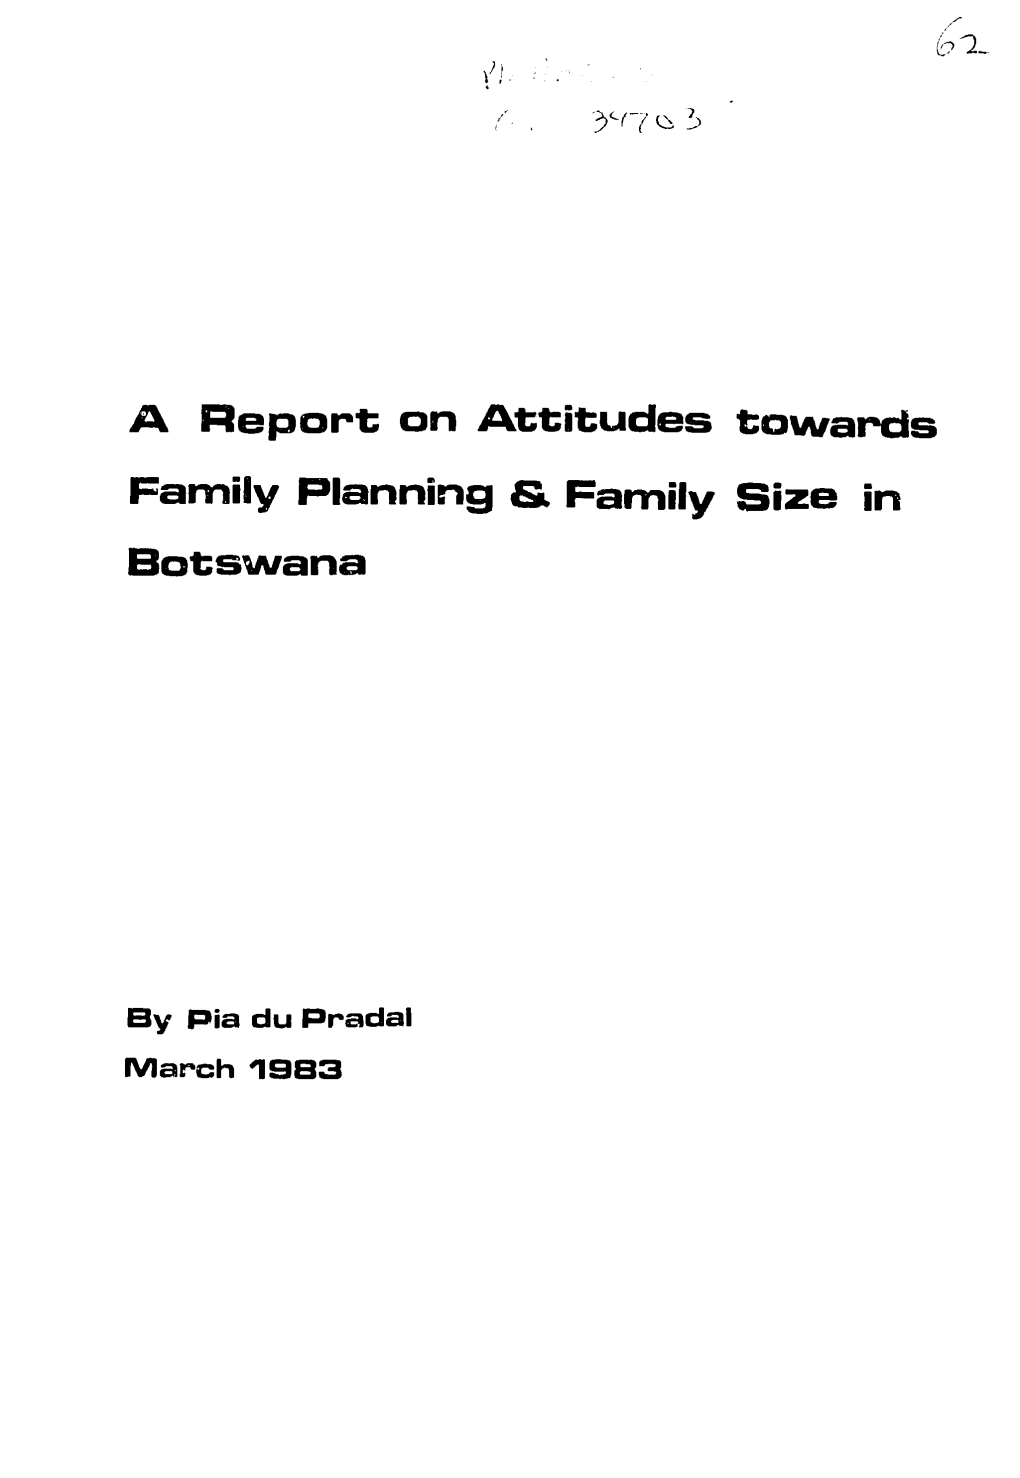 A Report on Attitudes Towards Family Planning & Family Size in Botswana